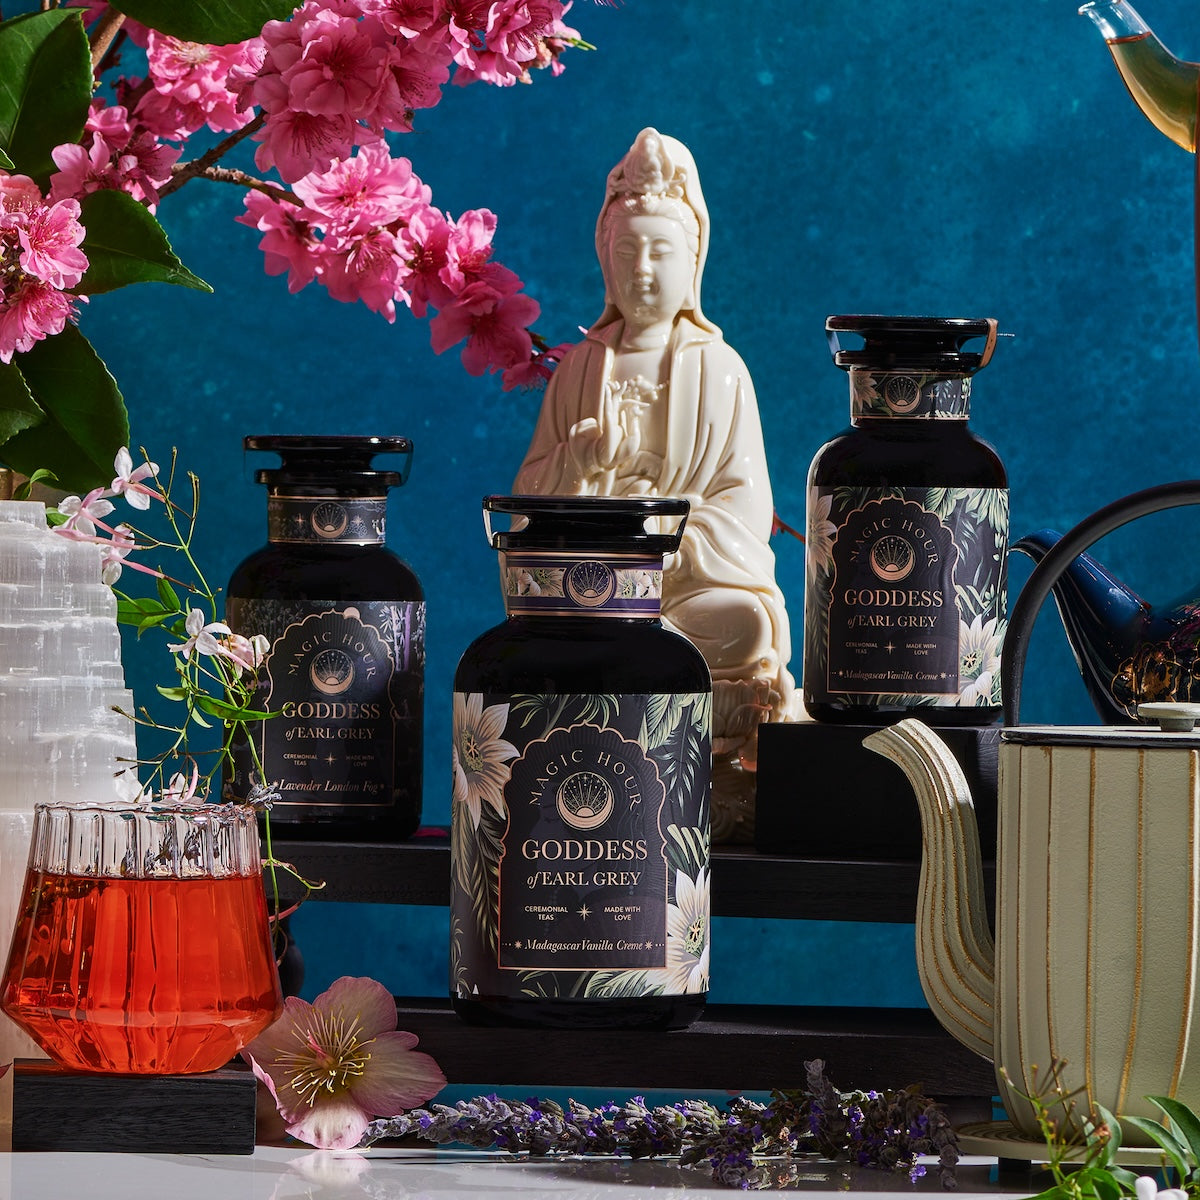 A serene tea setup featuring three &quot;Goddess of Earl: Madagascar Vanilla Creme Tea for Soothing Delight &amp; Delicious Decadence&quot; tea jars from Magic Hour, a white statue, blooming pink flowers, a white striped teapot, and a glass of black tea on a wooden table. A calming blue backdrop enhances the tranquil scene.